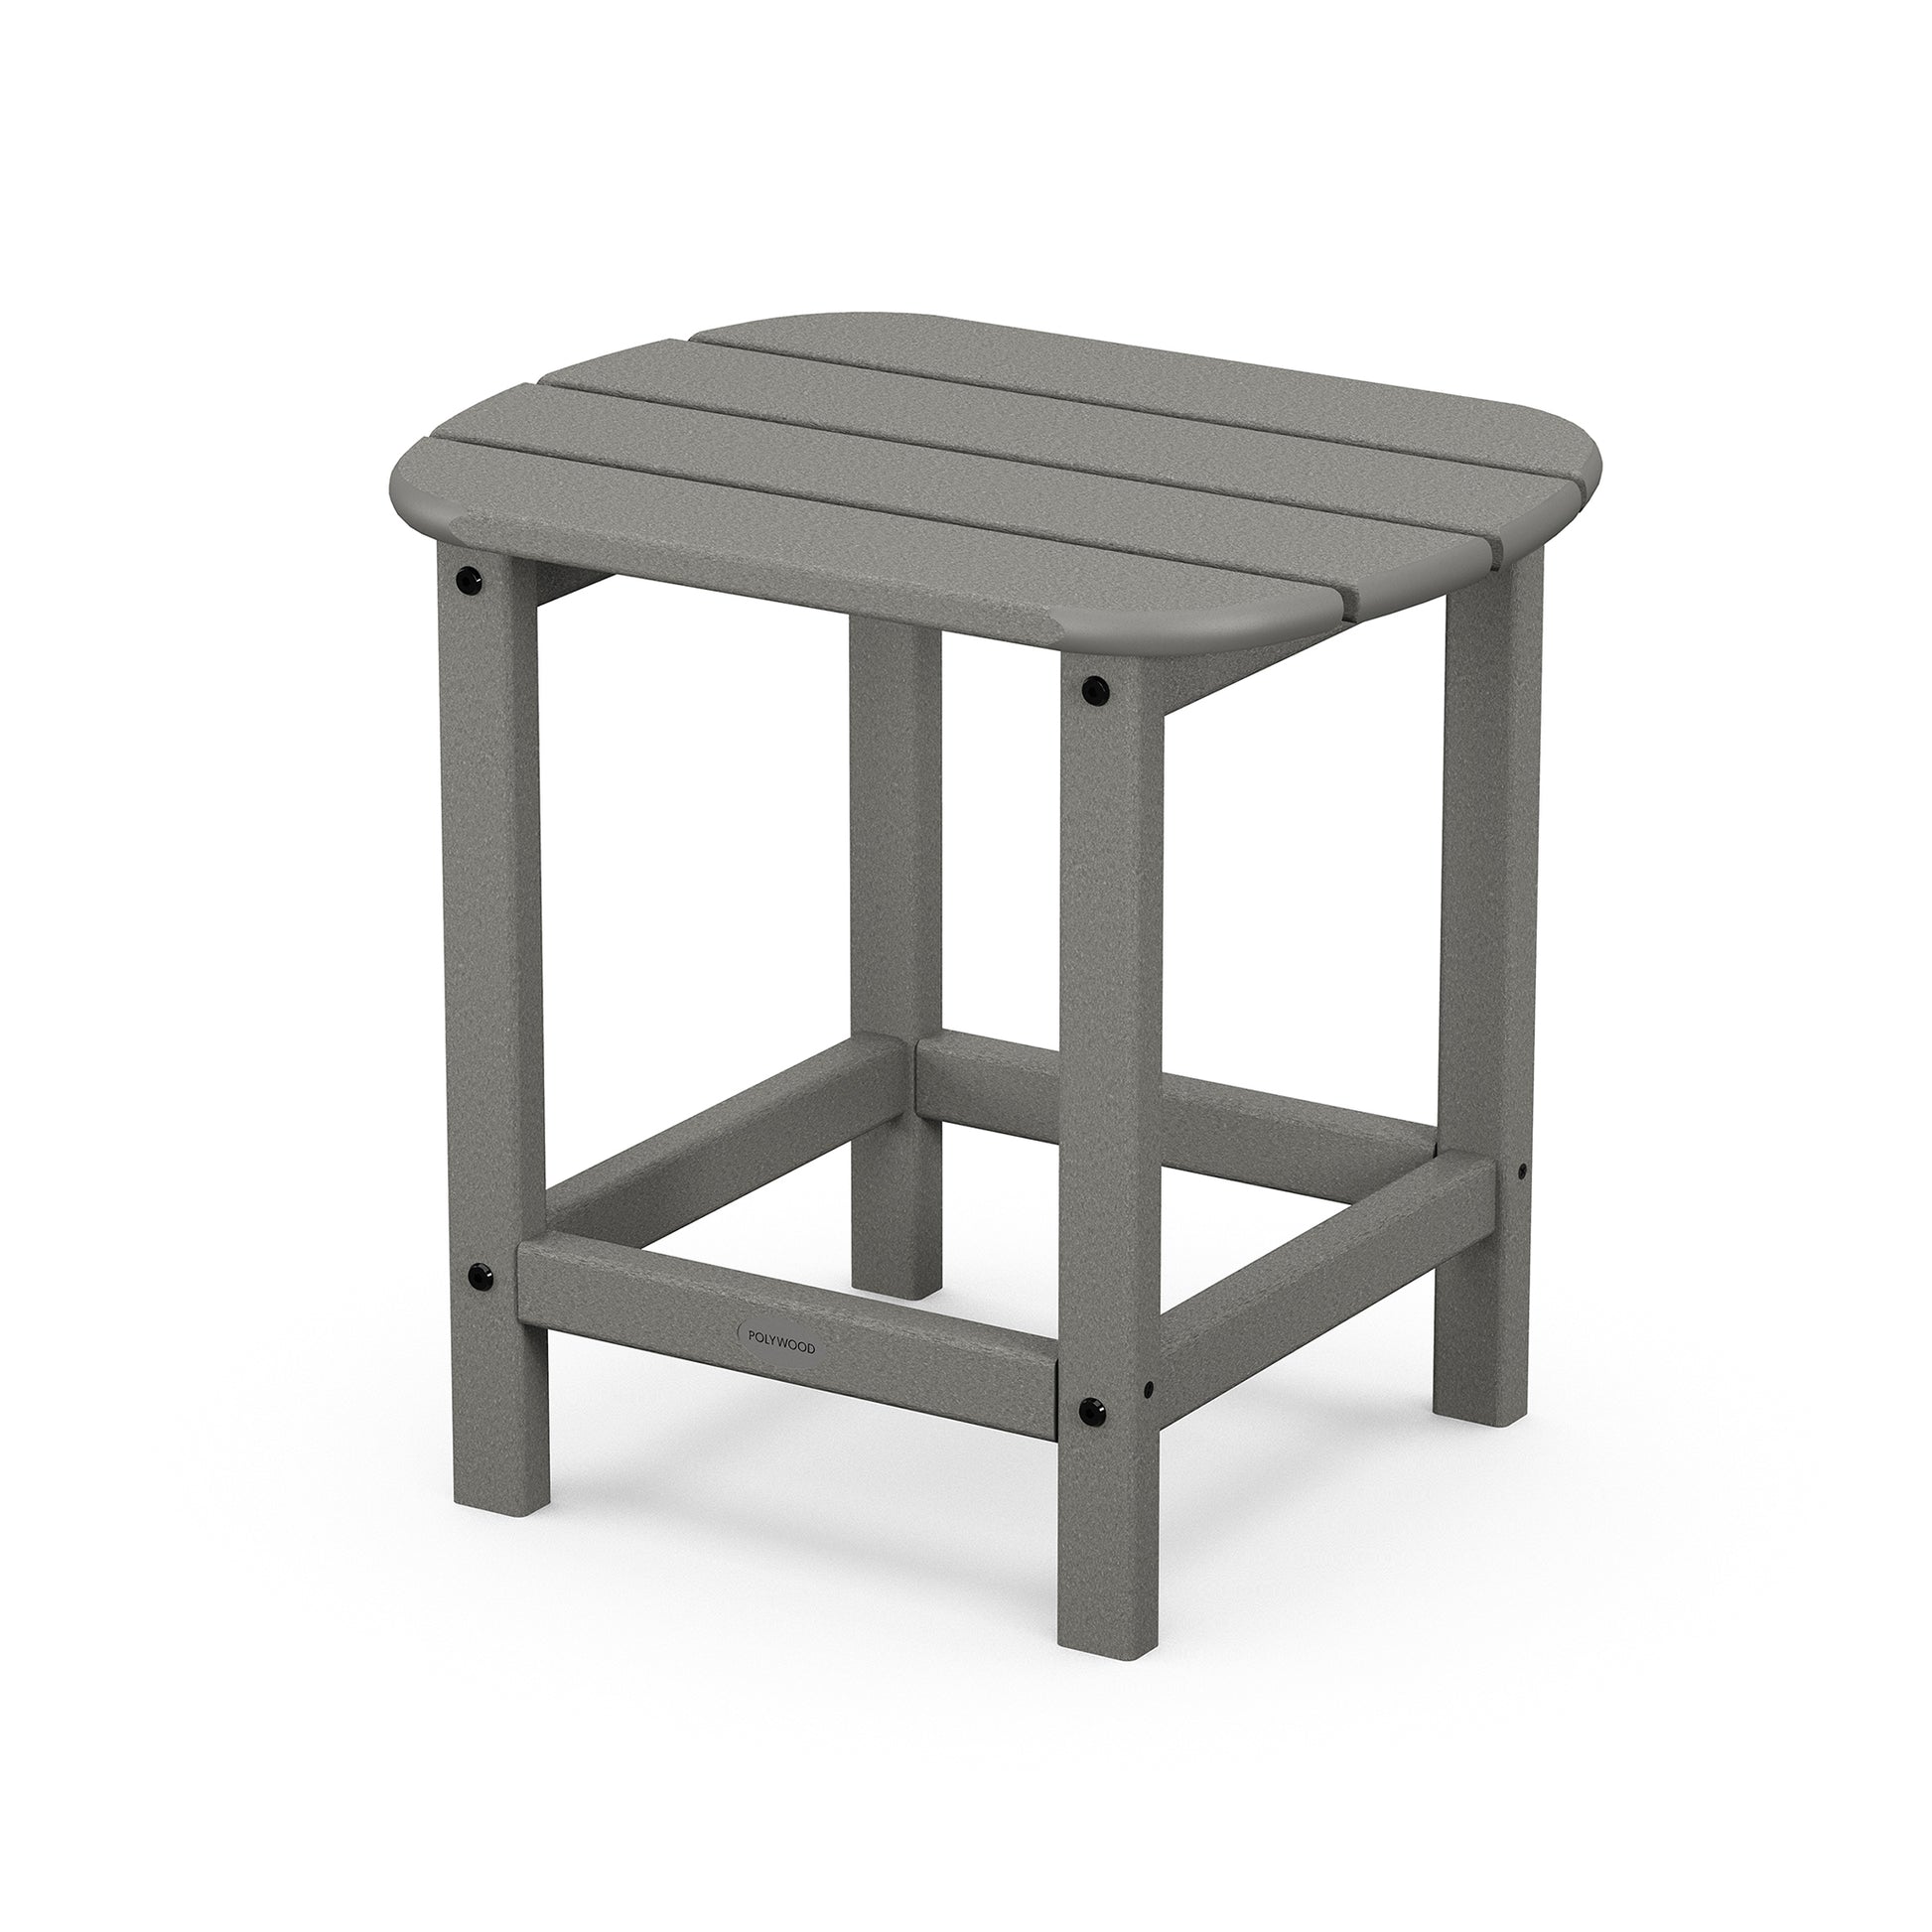 A simple gray POLYWOOD® South Beach Adirondack 18" Side Table made of durable plastic, featuring a rectangular slatted top and sturdy legs, displayed on a plain background.